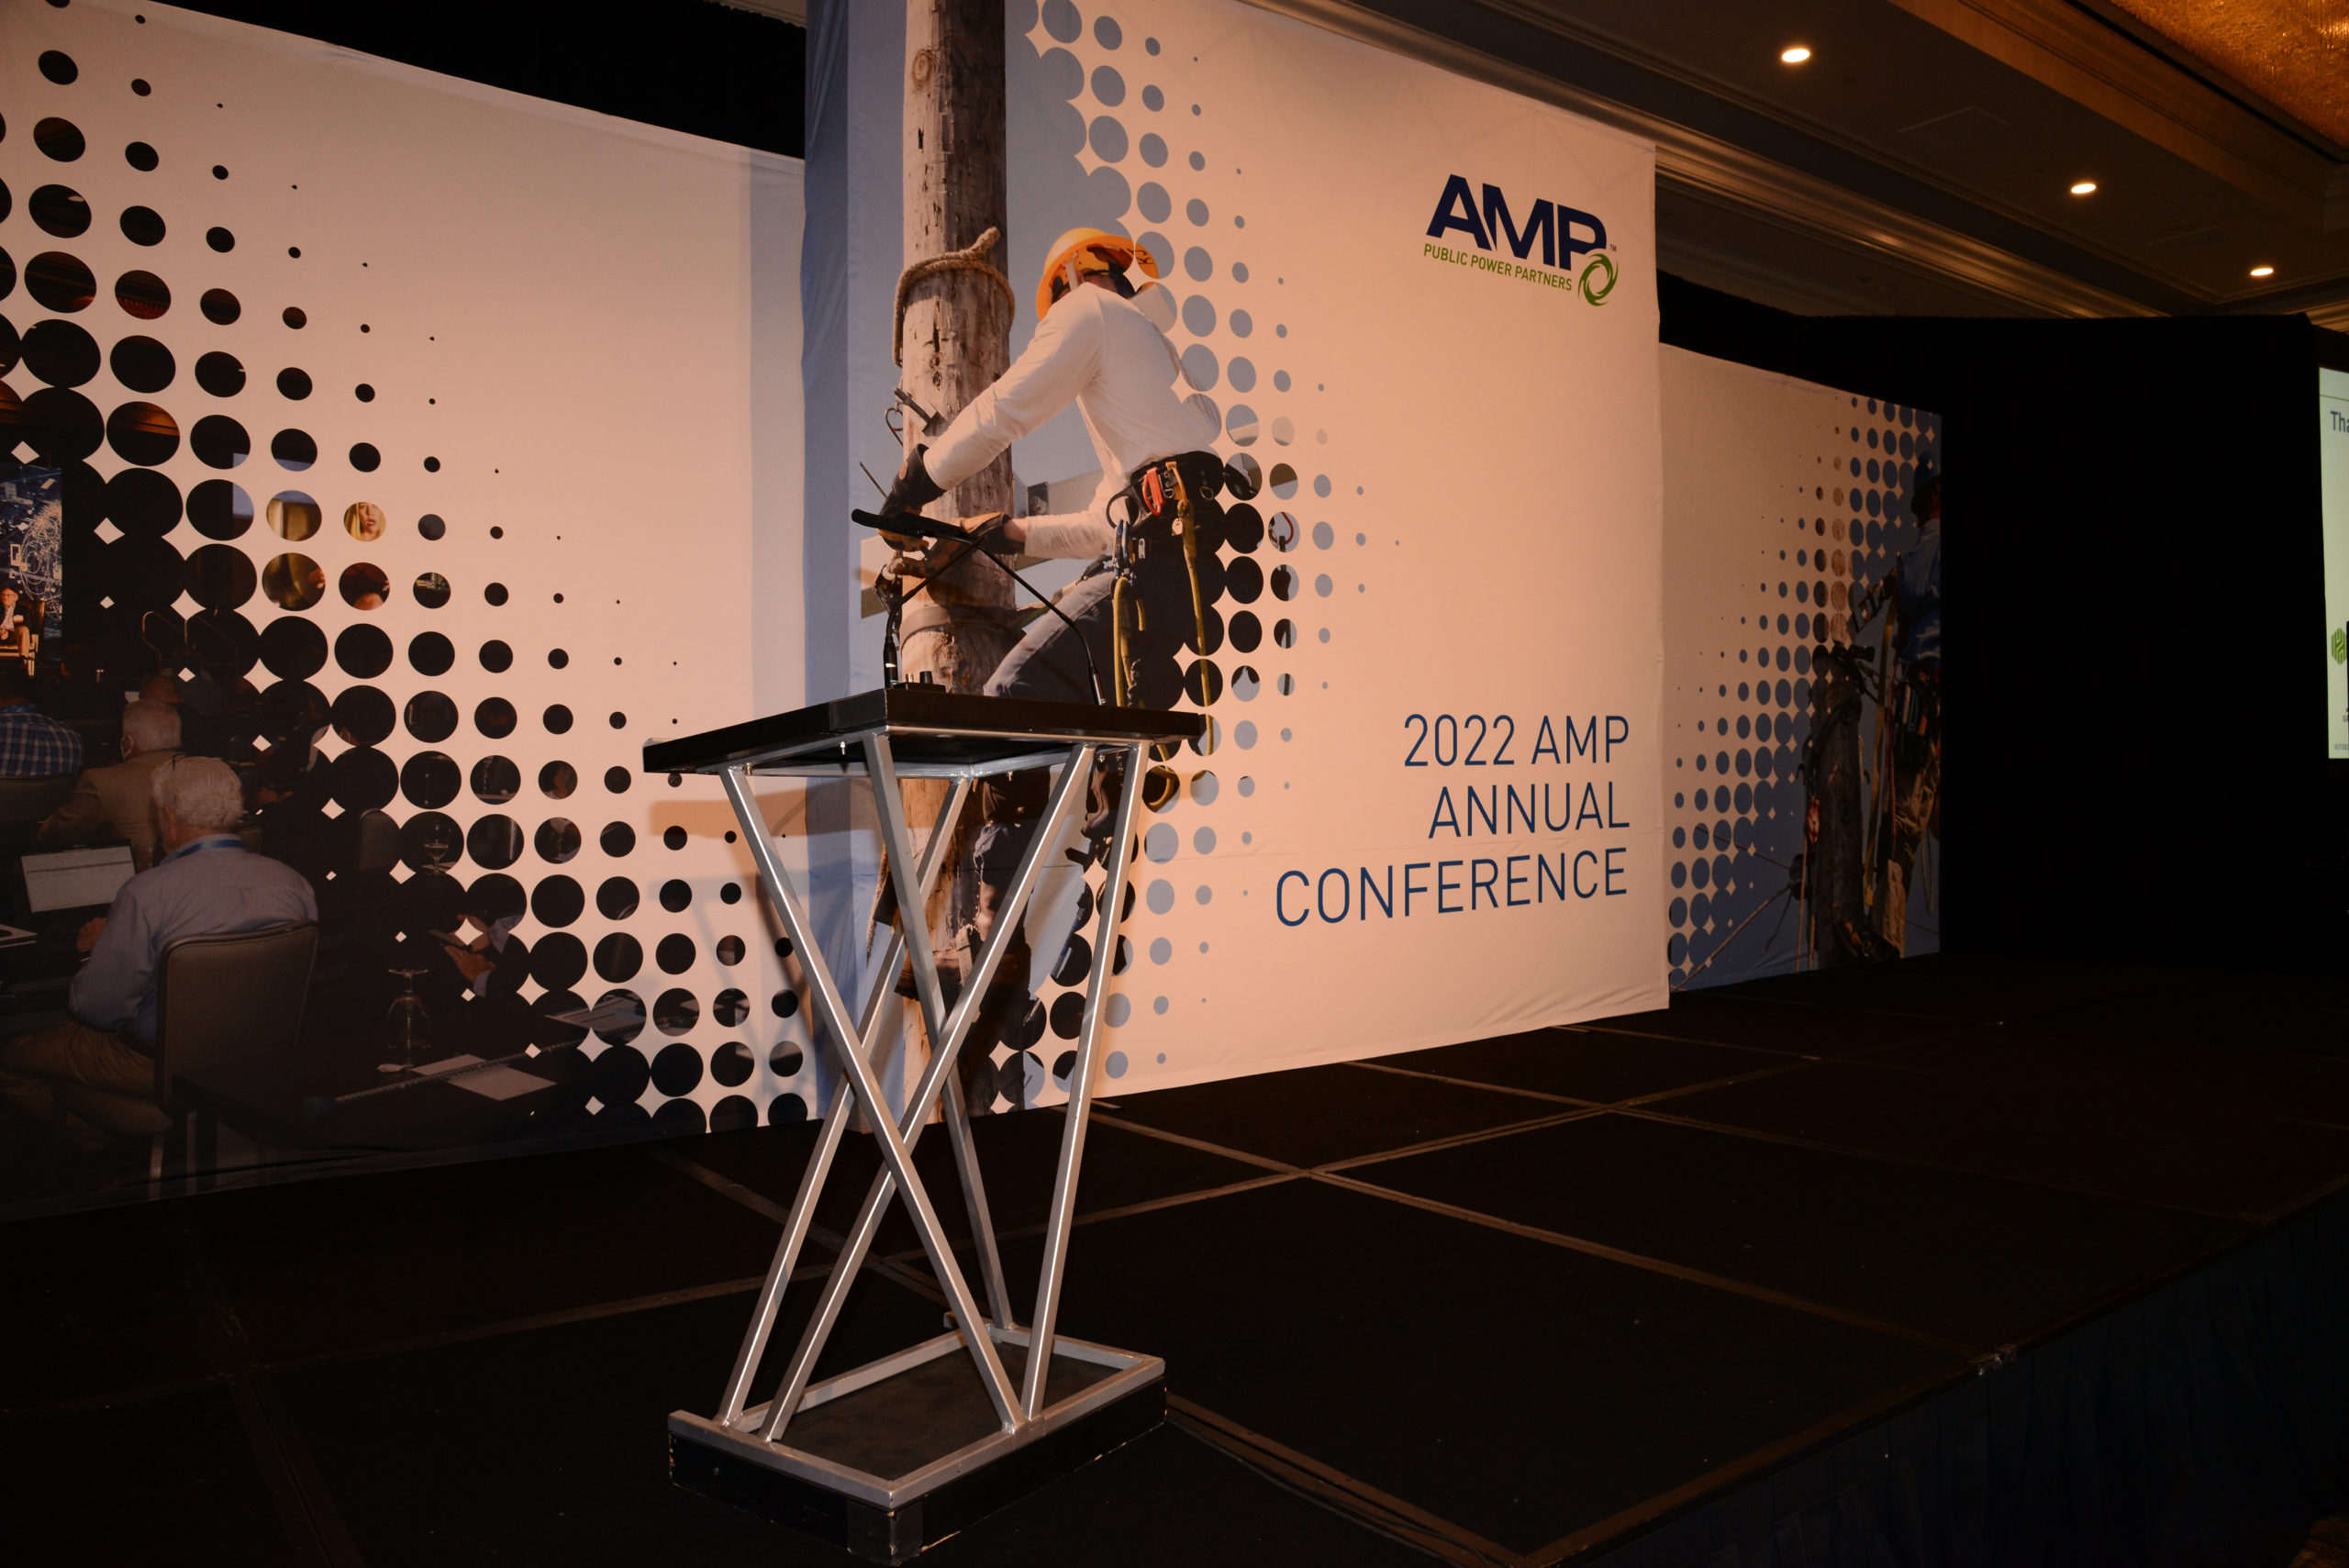 The 2022 AMP Annual Conference was held Sept. 26-28 at the Hilton Columbus at Easton. Nearly 350 people were in attendance.